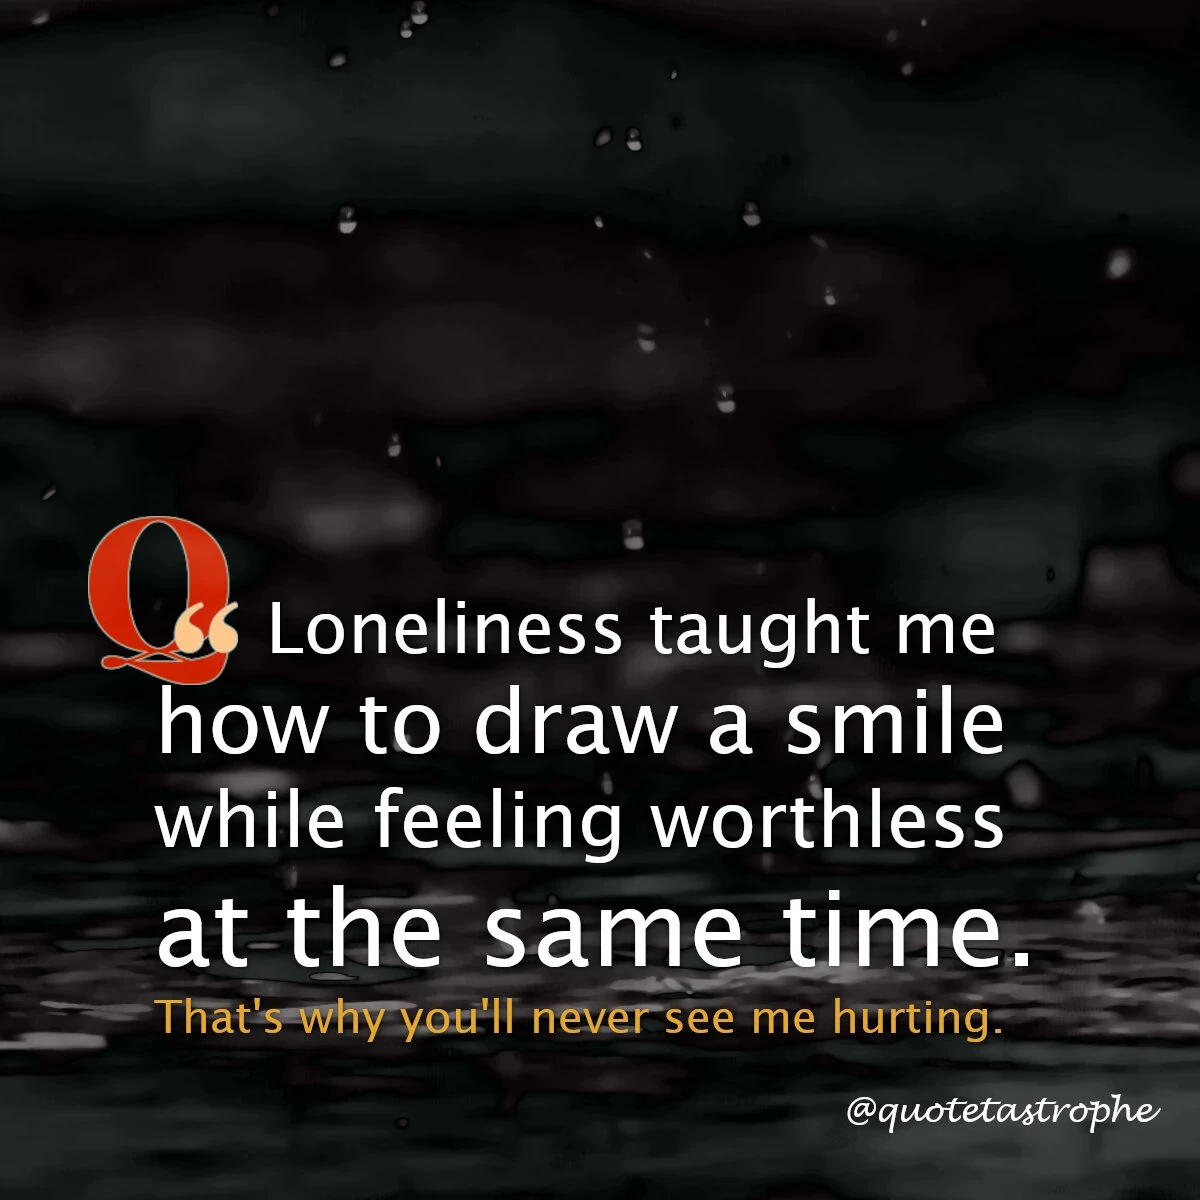 Loneliness Taught Me How to Draw a Smile